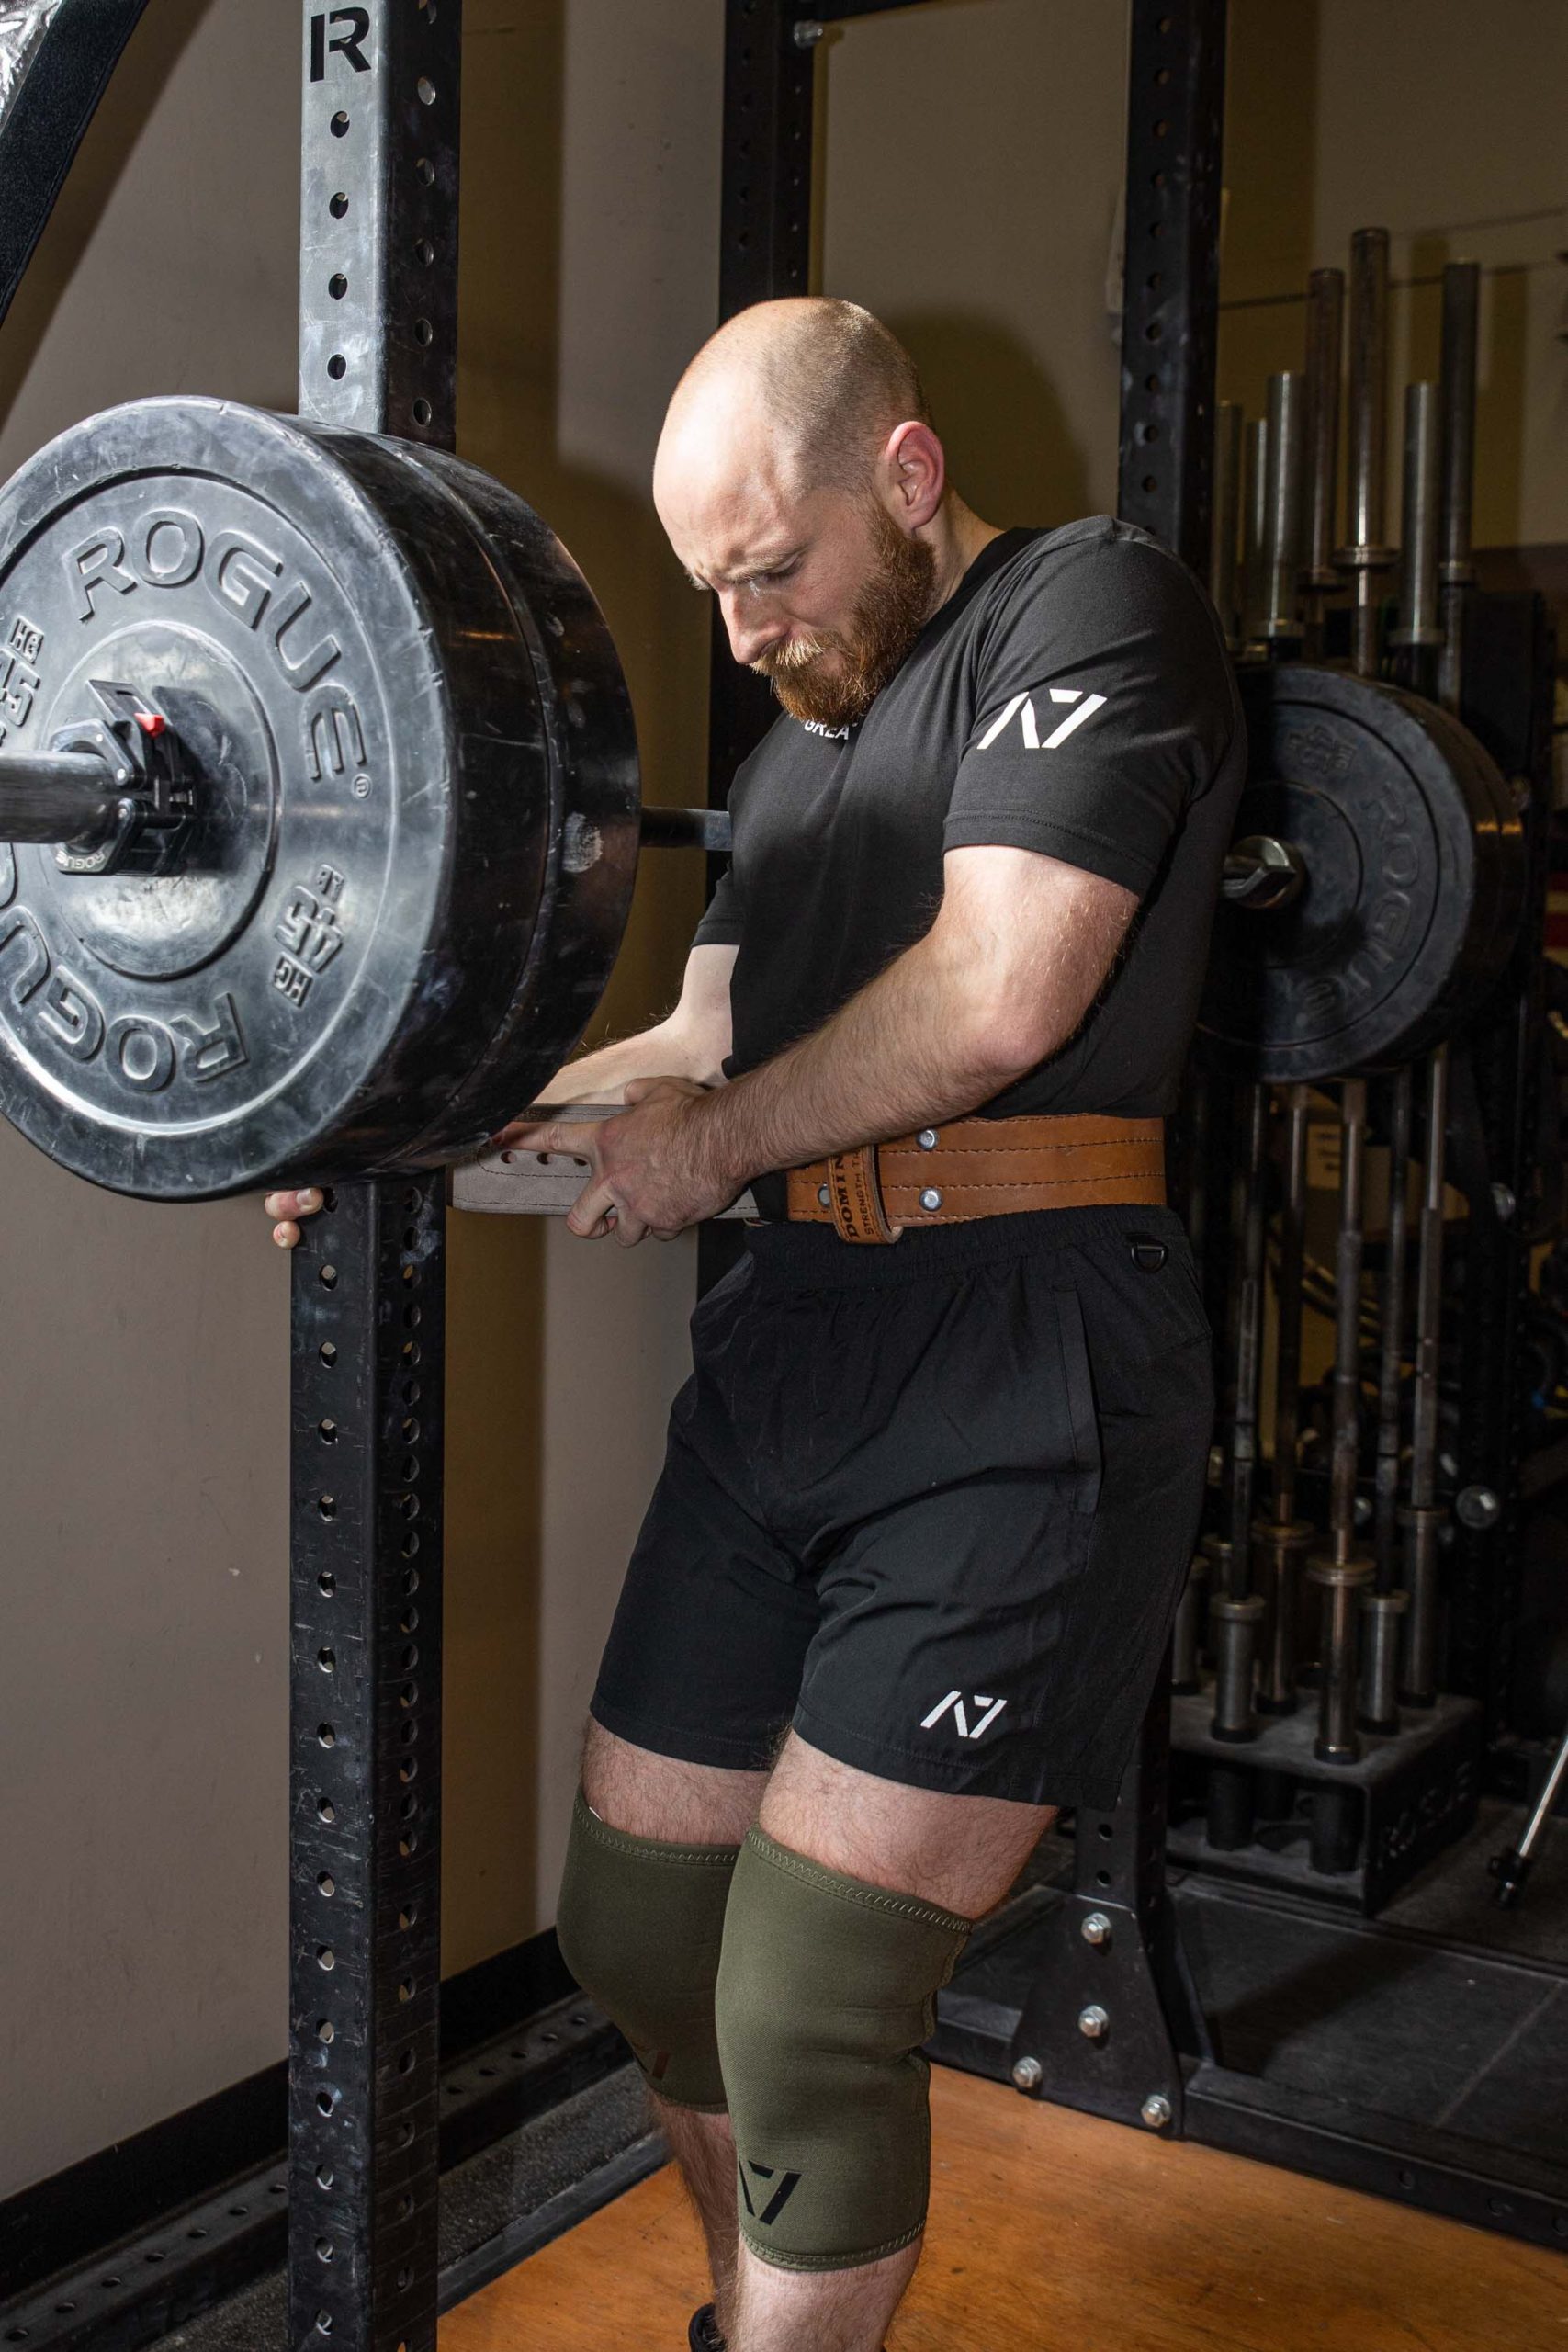 WEIGHT LIFTING GEAR AND CLOTHES (12 ESSENTIAL PIECES)